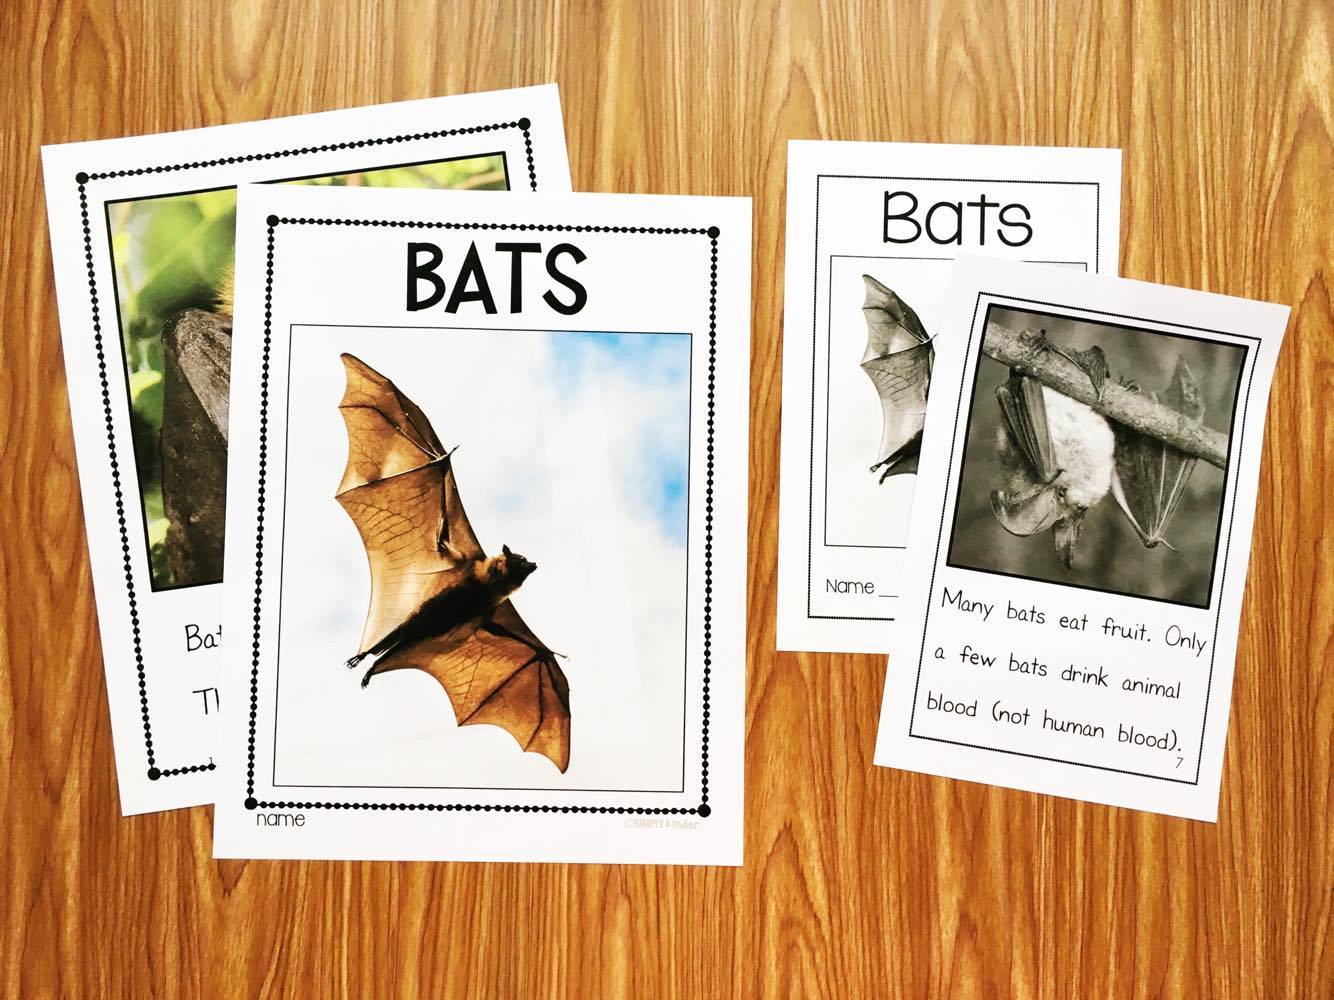 Bats Nonfiction Reader from Simply Kinder. This book uses real photos and easy text for the kids to understand. Perfect for preschool, kindergarten, and first grade.